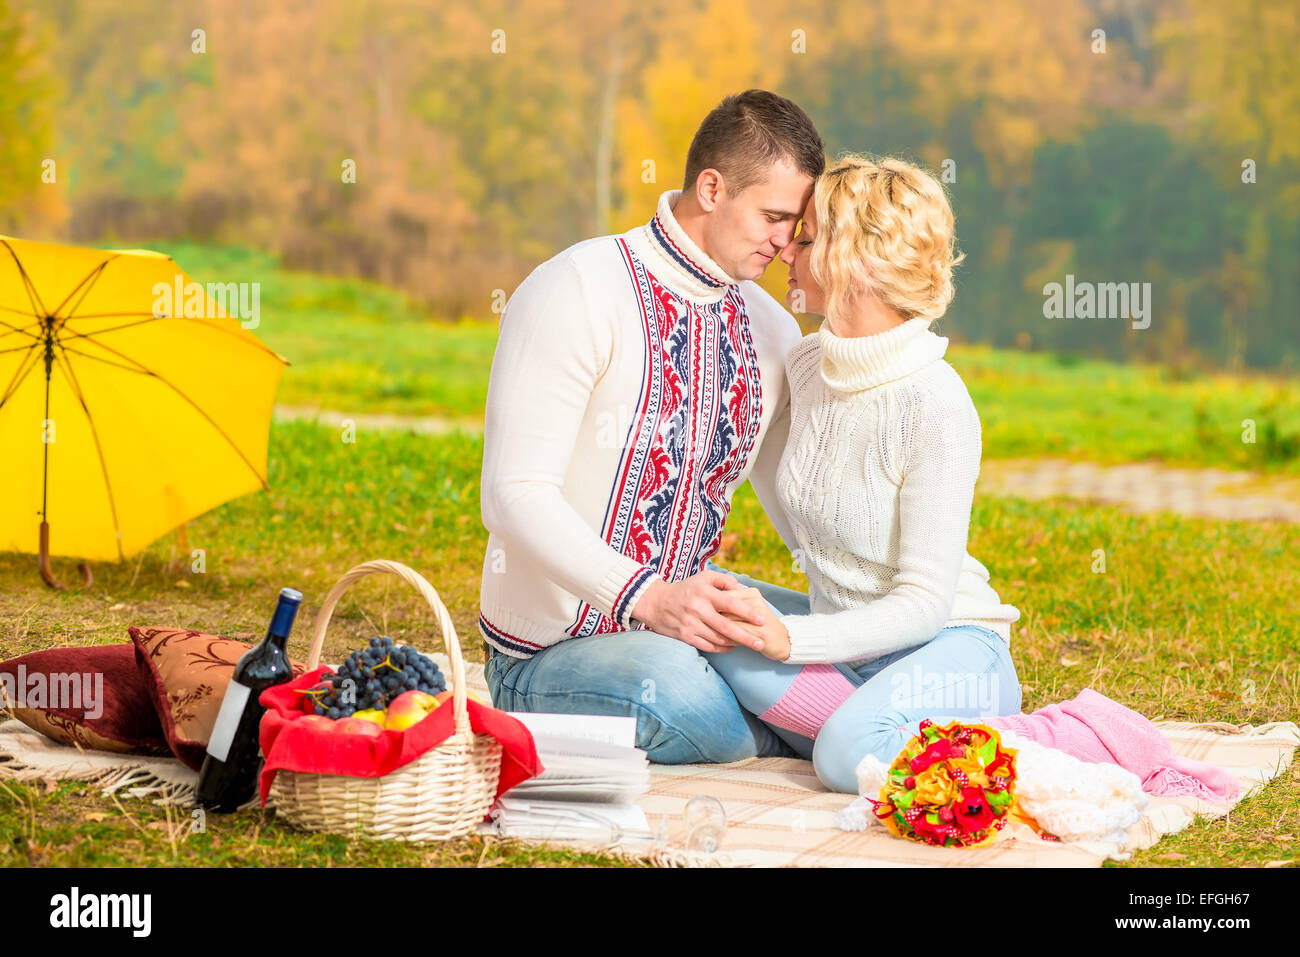 affectionate relationship of young couples in nature Stock Photo